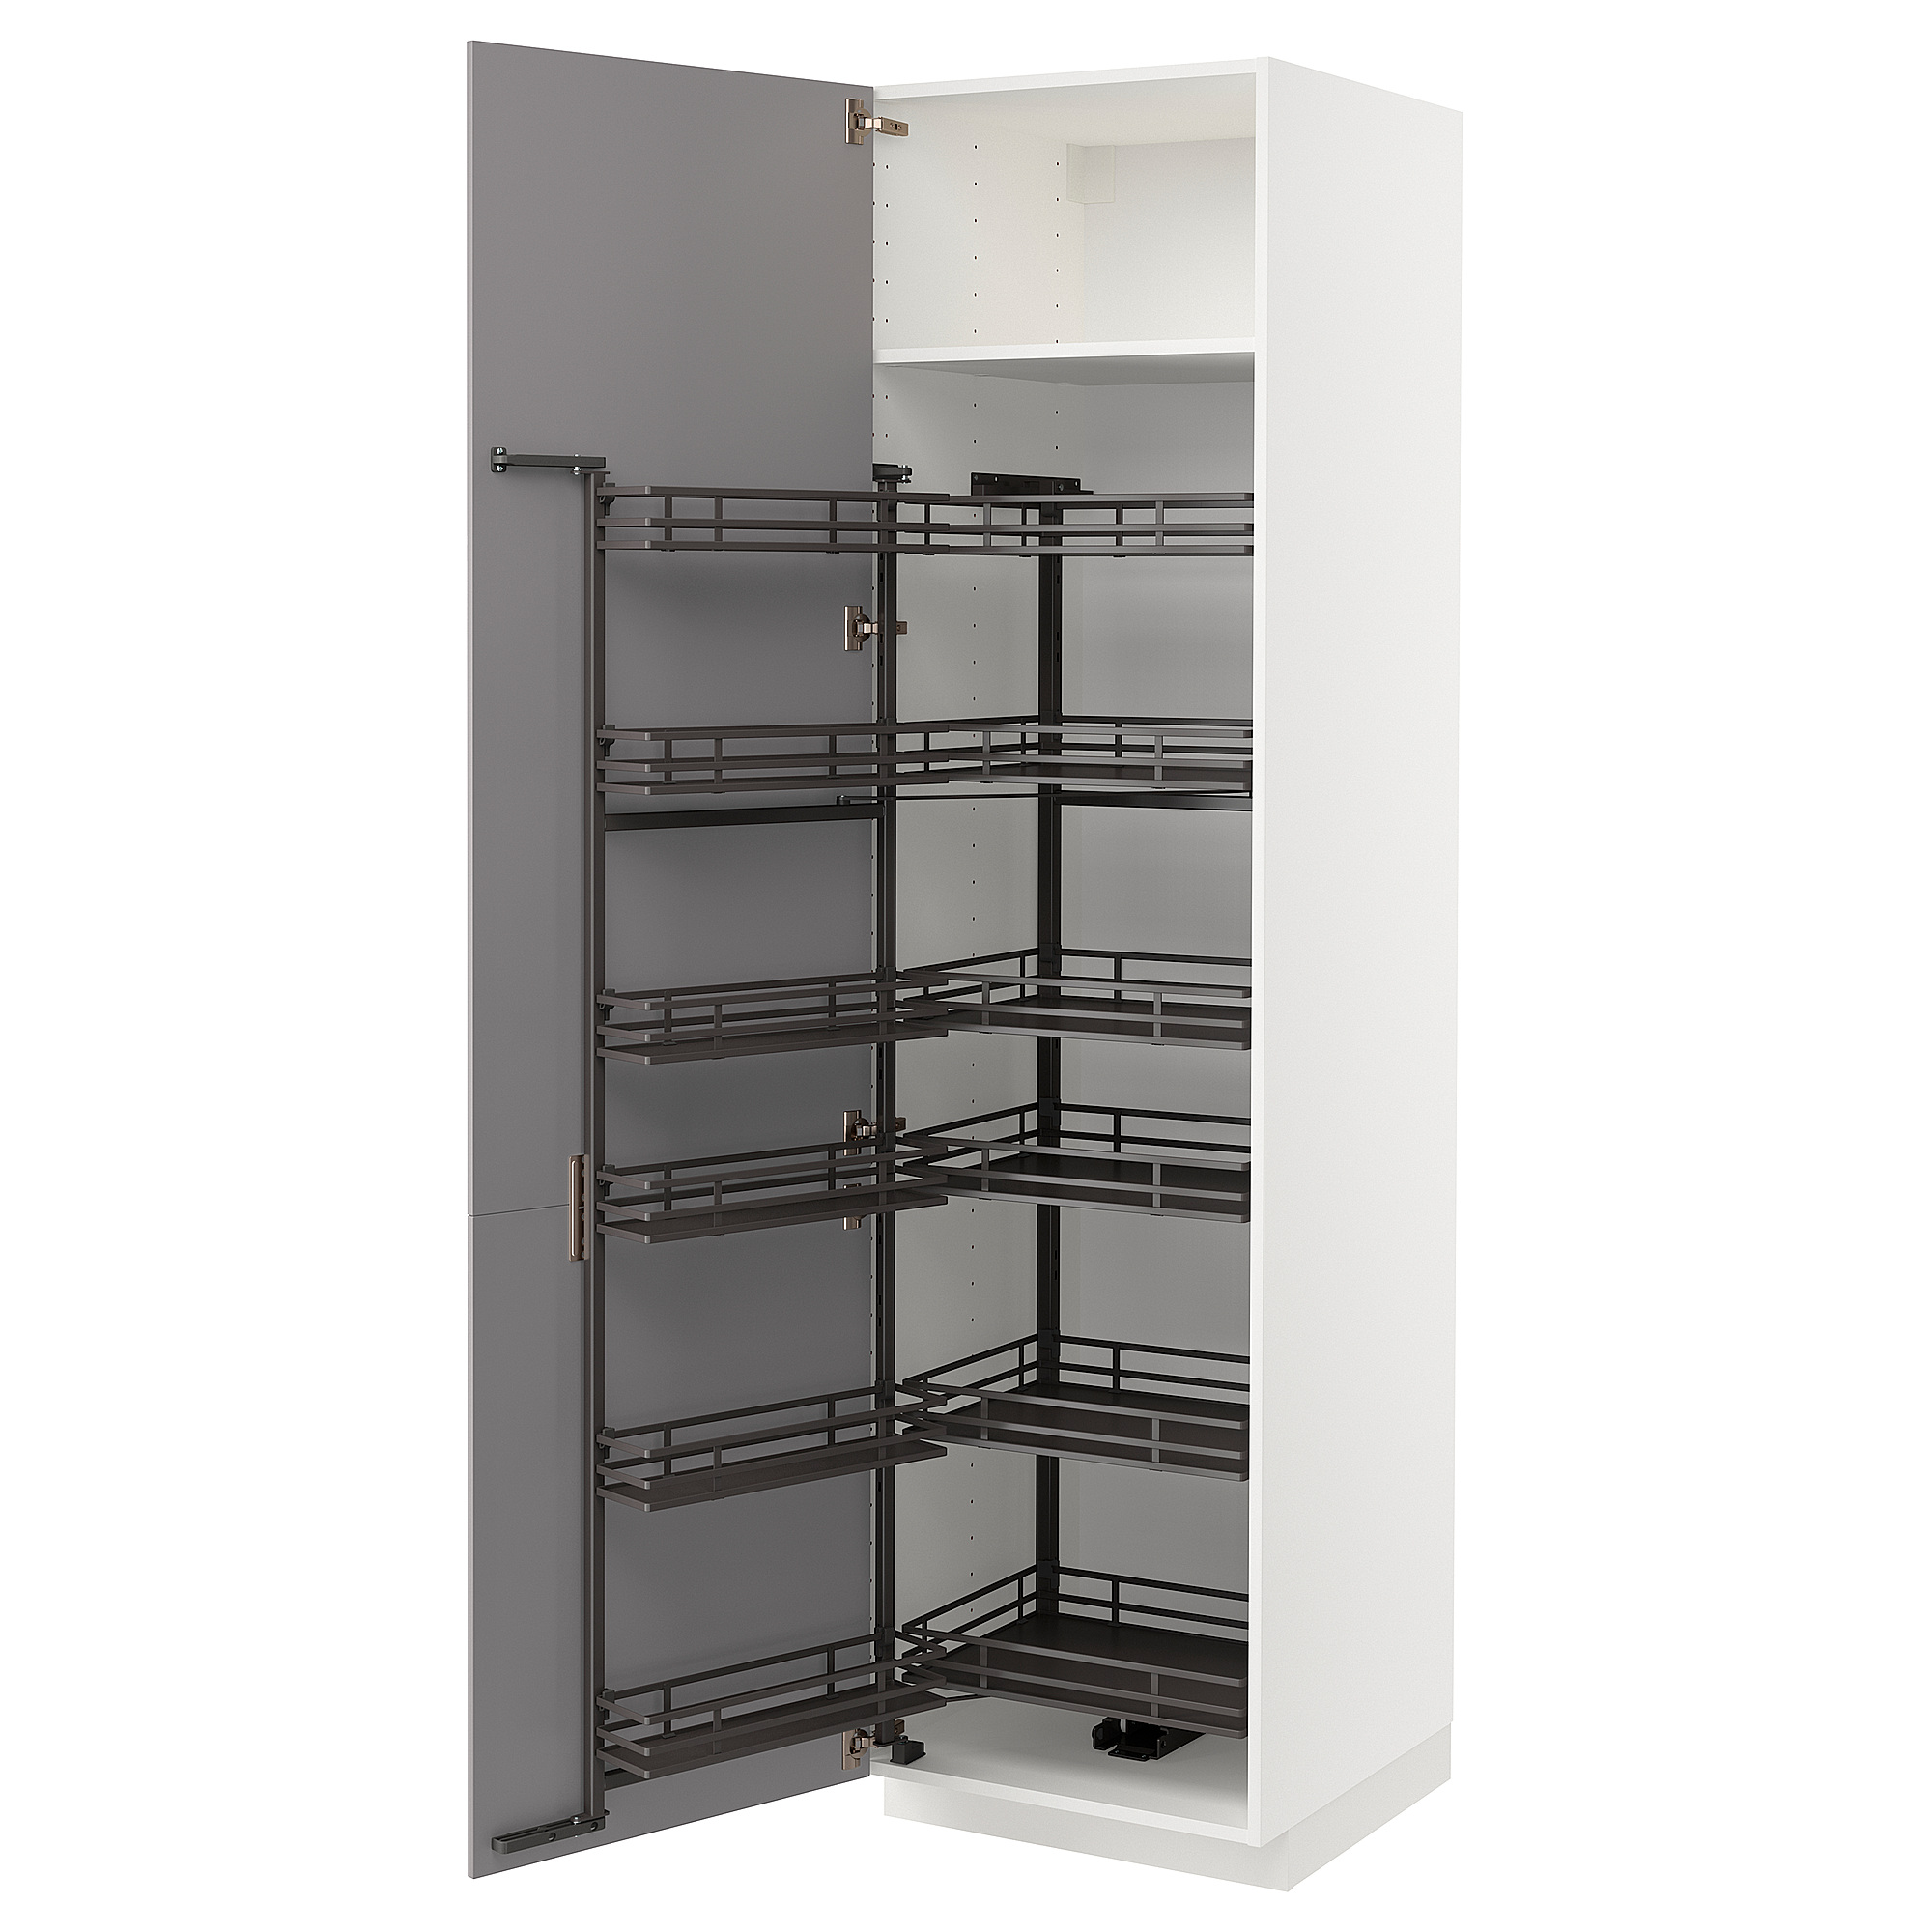 METOD high cabinet with pull-out larder